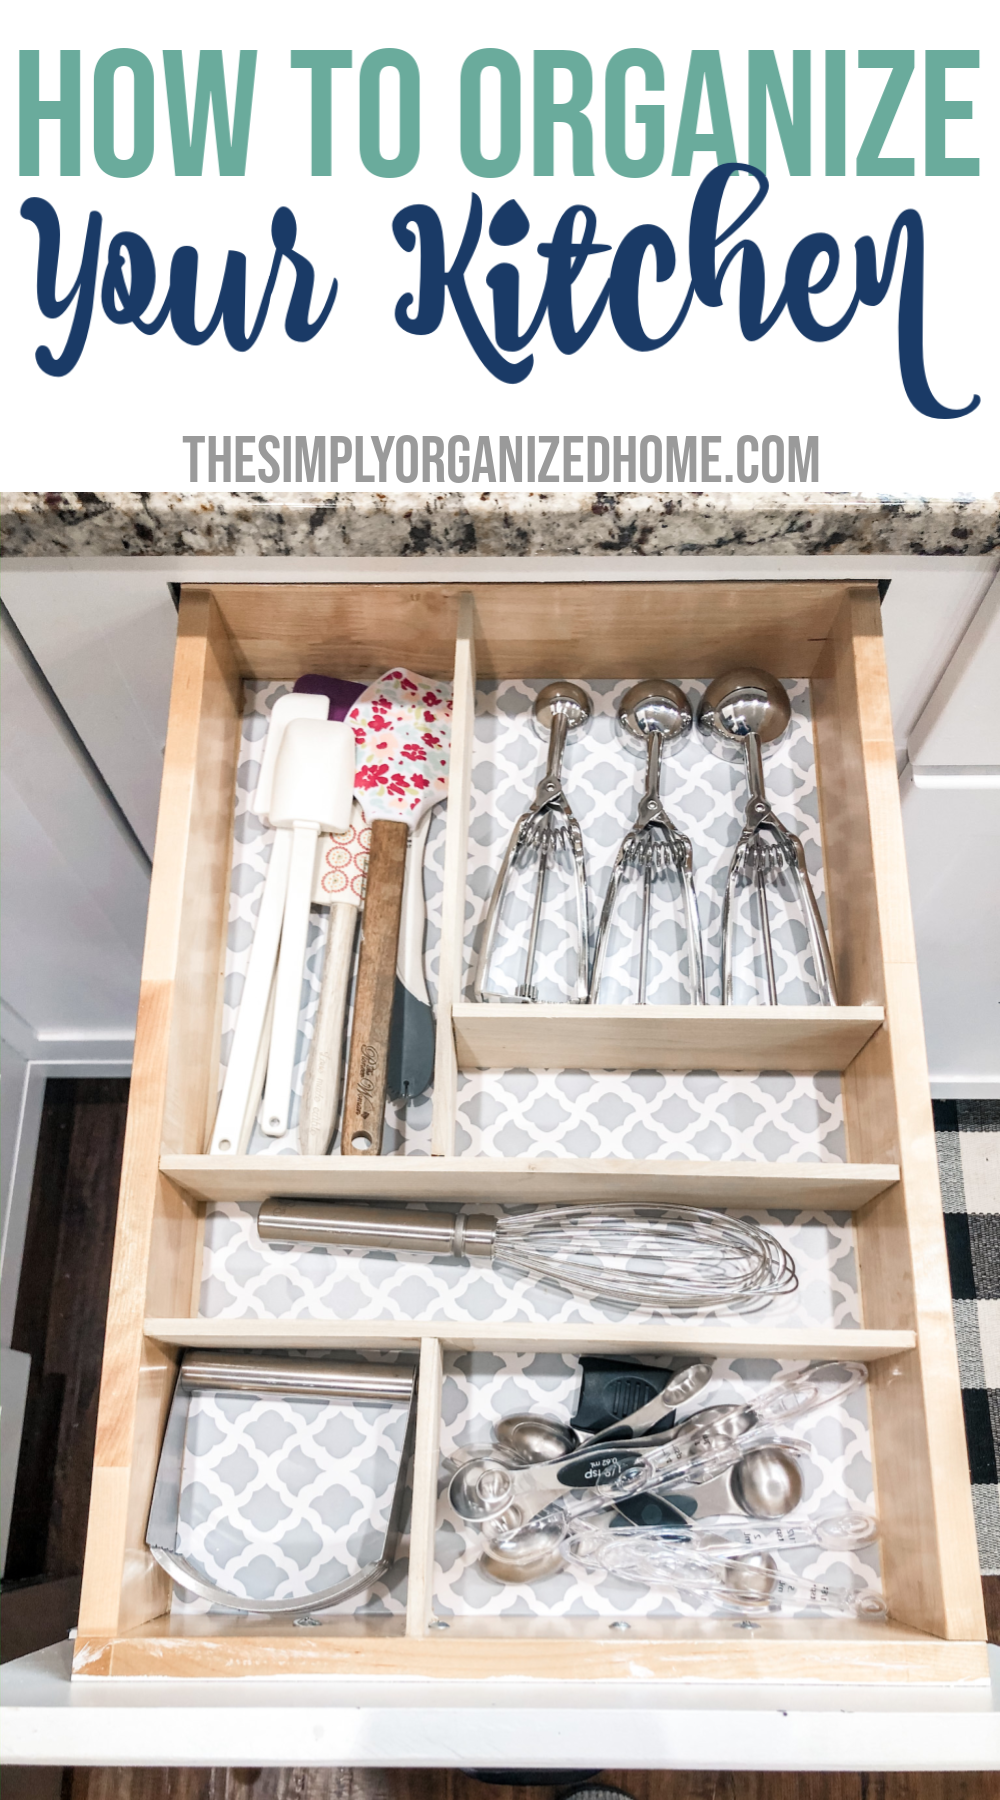 https://www.thesimplyorganizedhome.com/wp-content/uploads/2020/02/How-to-Organize-Your-Kitchen.png